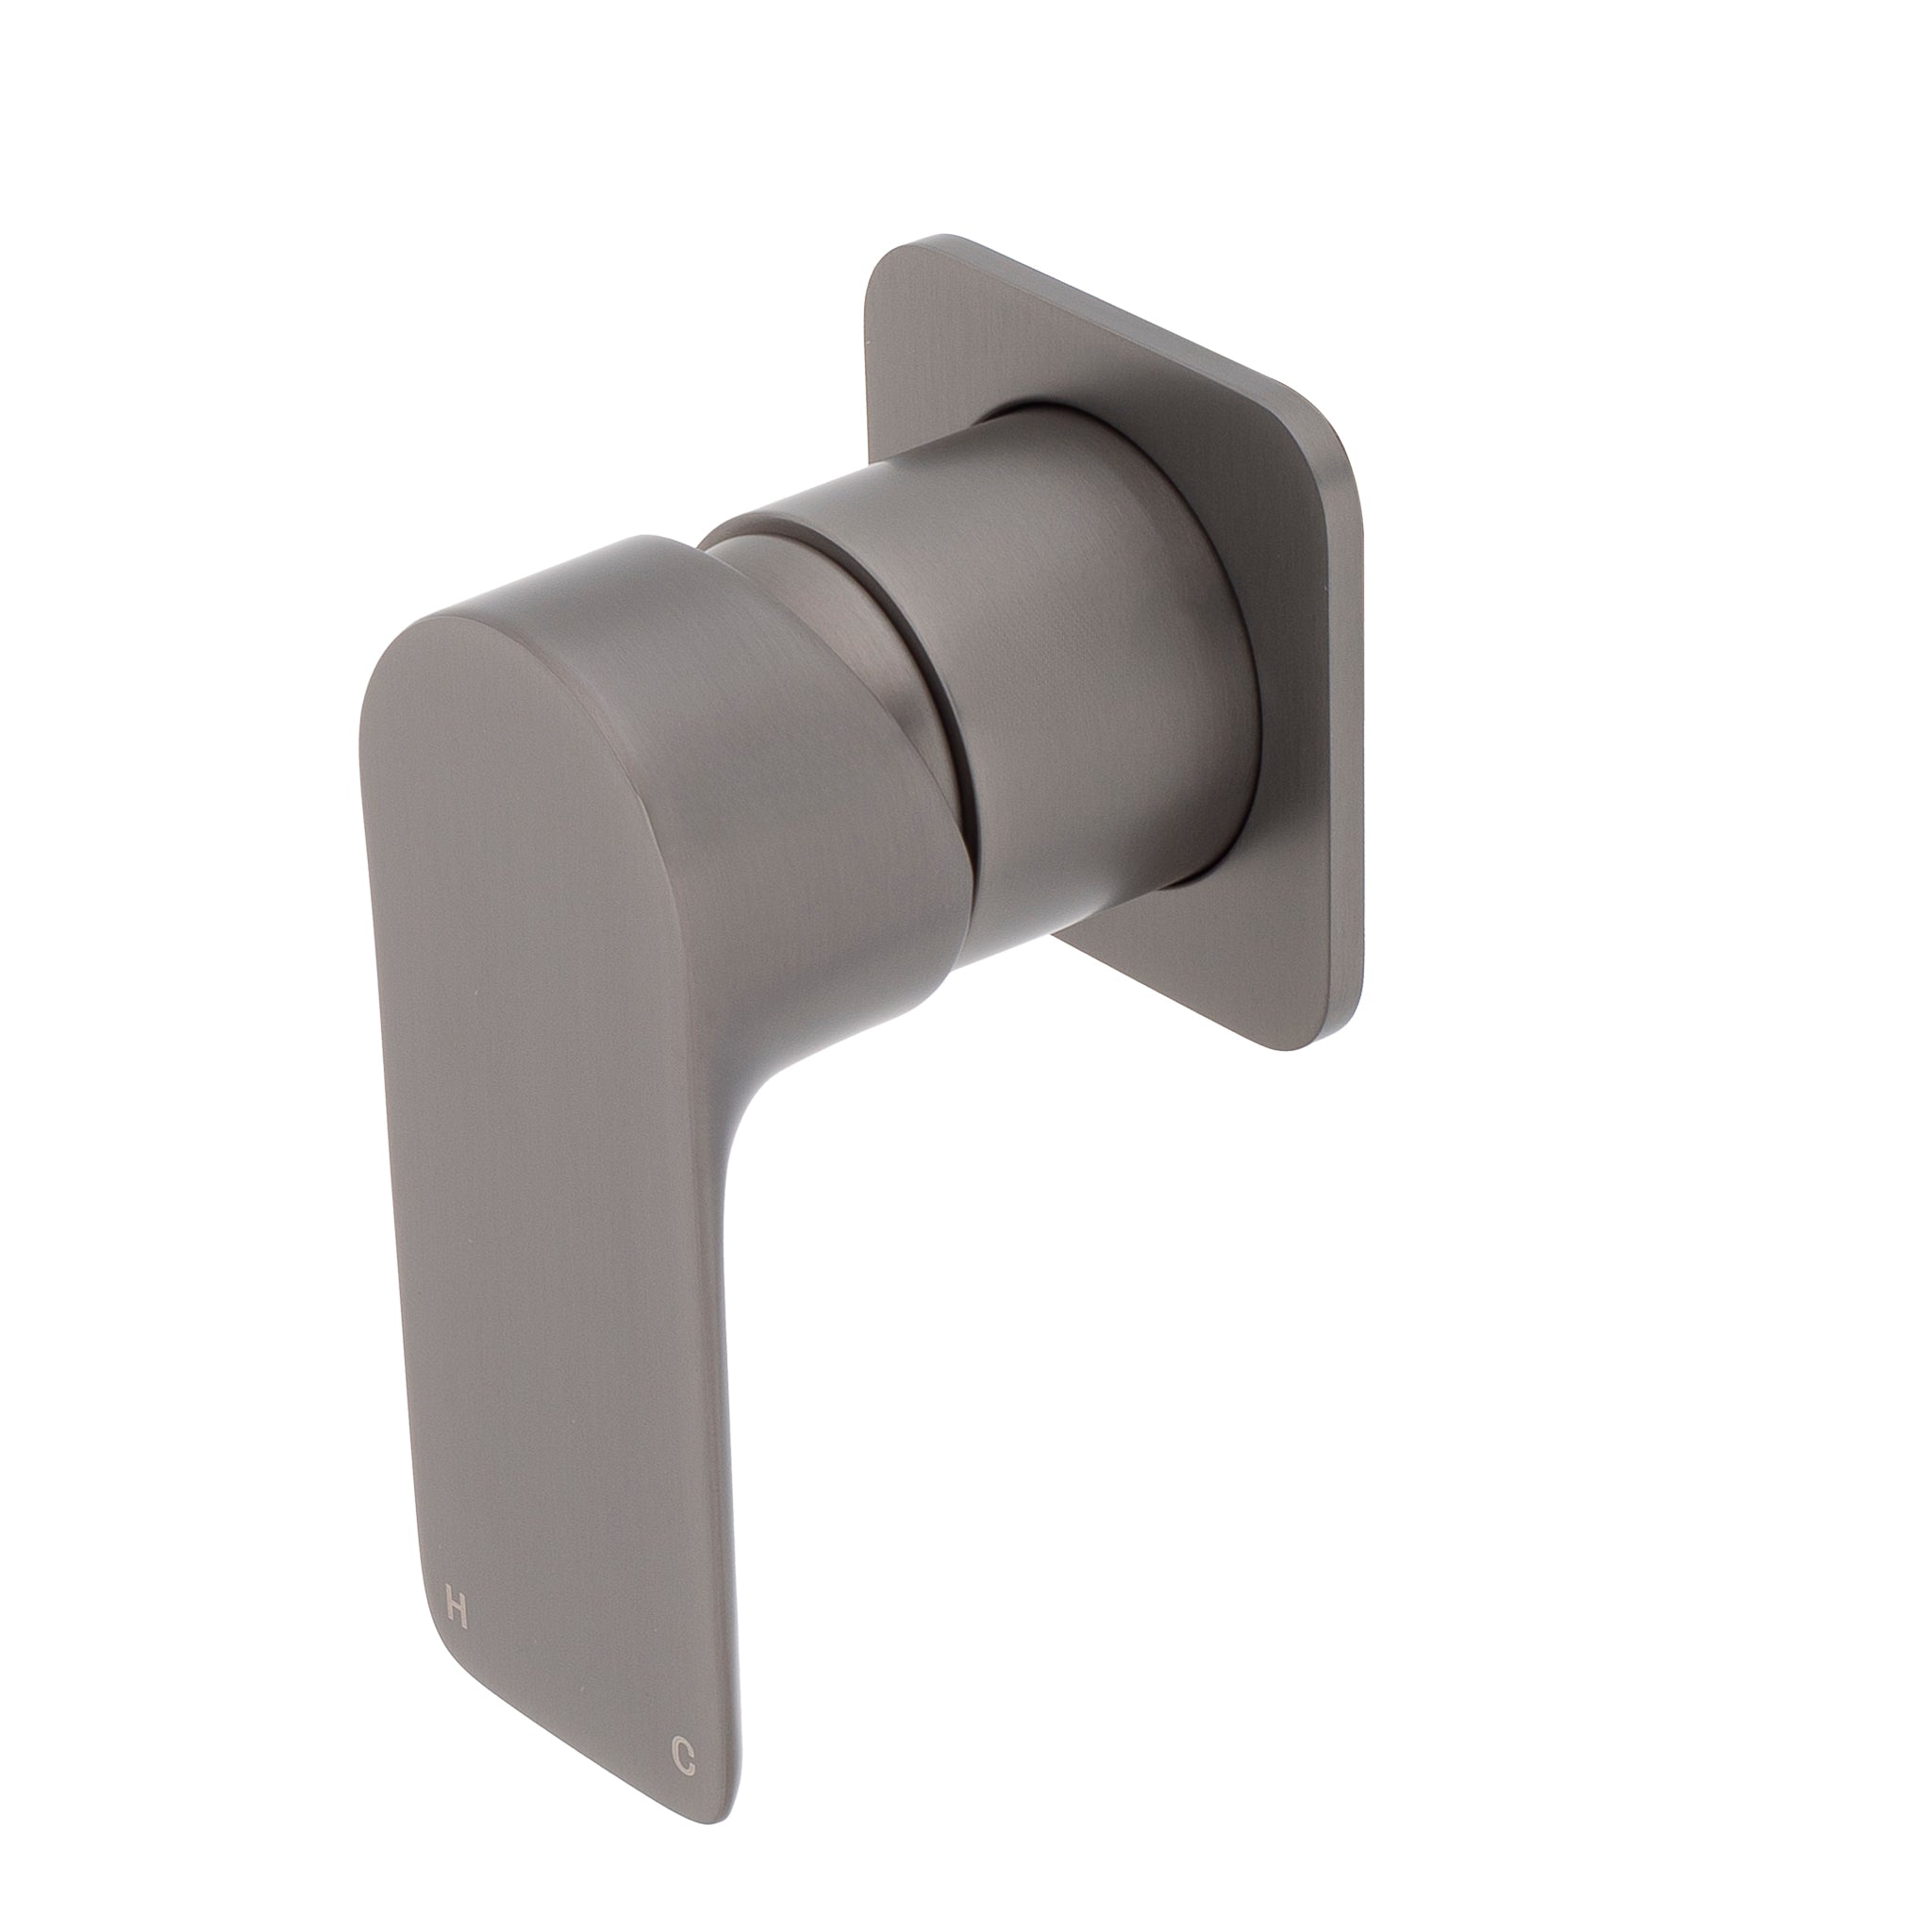 Jena Shower/ Bath Wall Mixer with Square Plates, Brushed Gunmetal